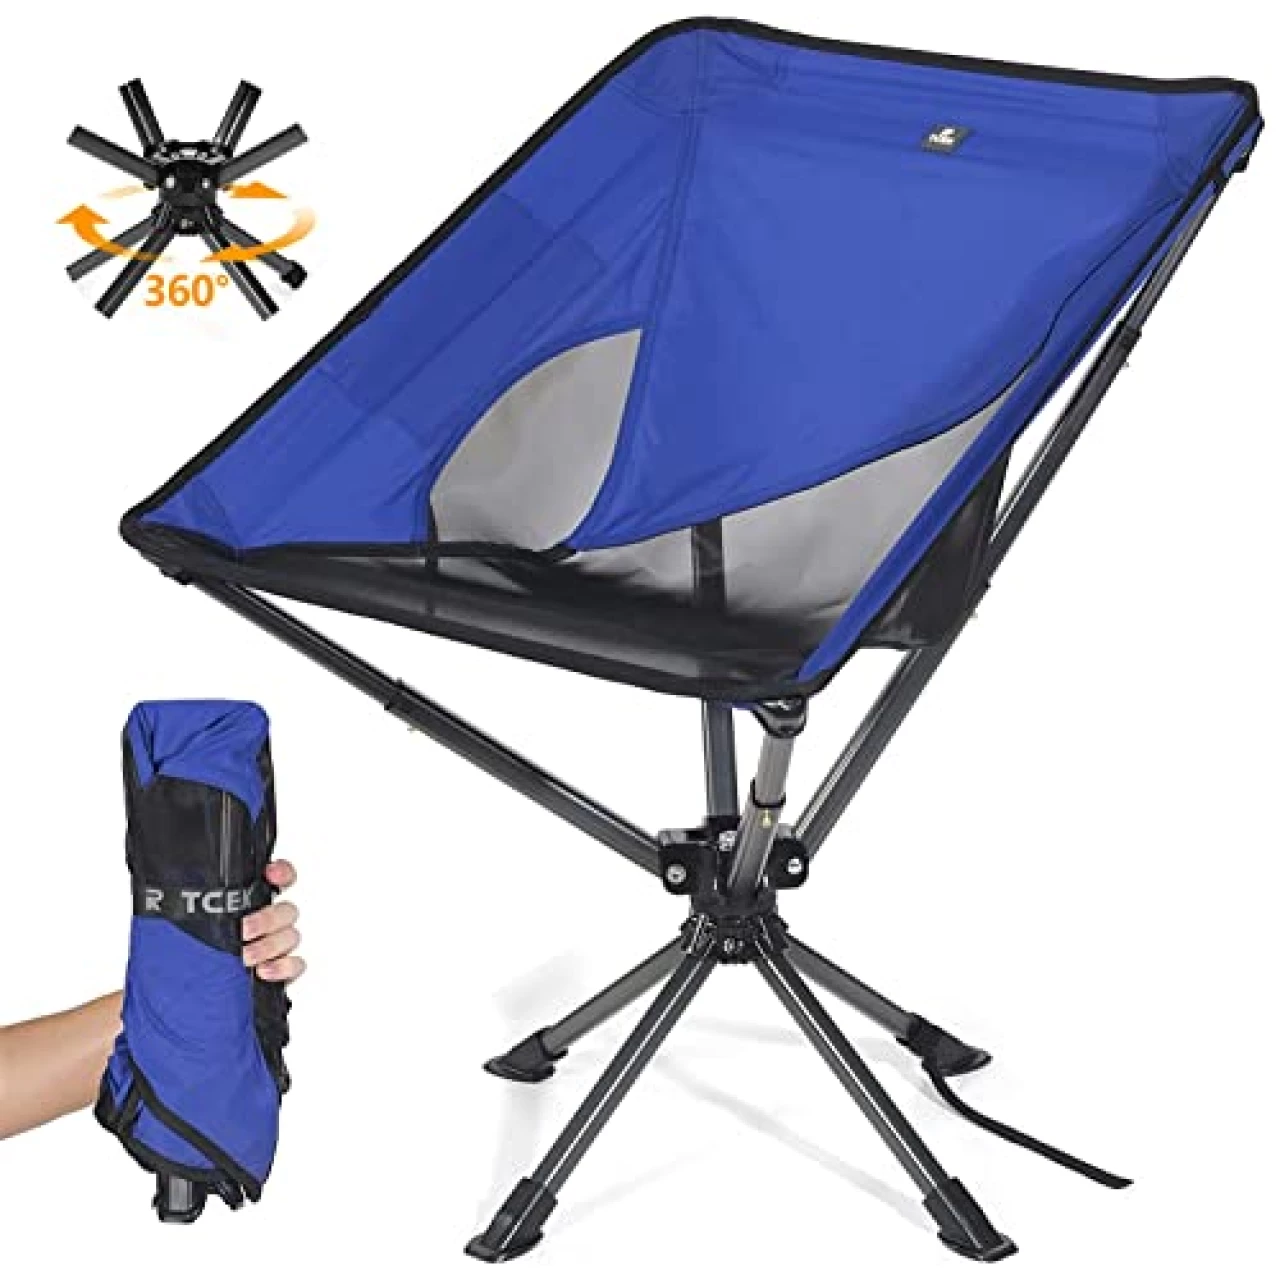 TCEK Swivel Portable Chair Camping Chairs - Small Compact Folding Chair for Adults That Setup in 8 Seconds, Lightweight Outdoor Backpacking Chair for Camp, Travel, Hiking, Beach, Support 300 LBS,Blue